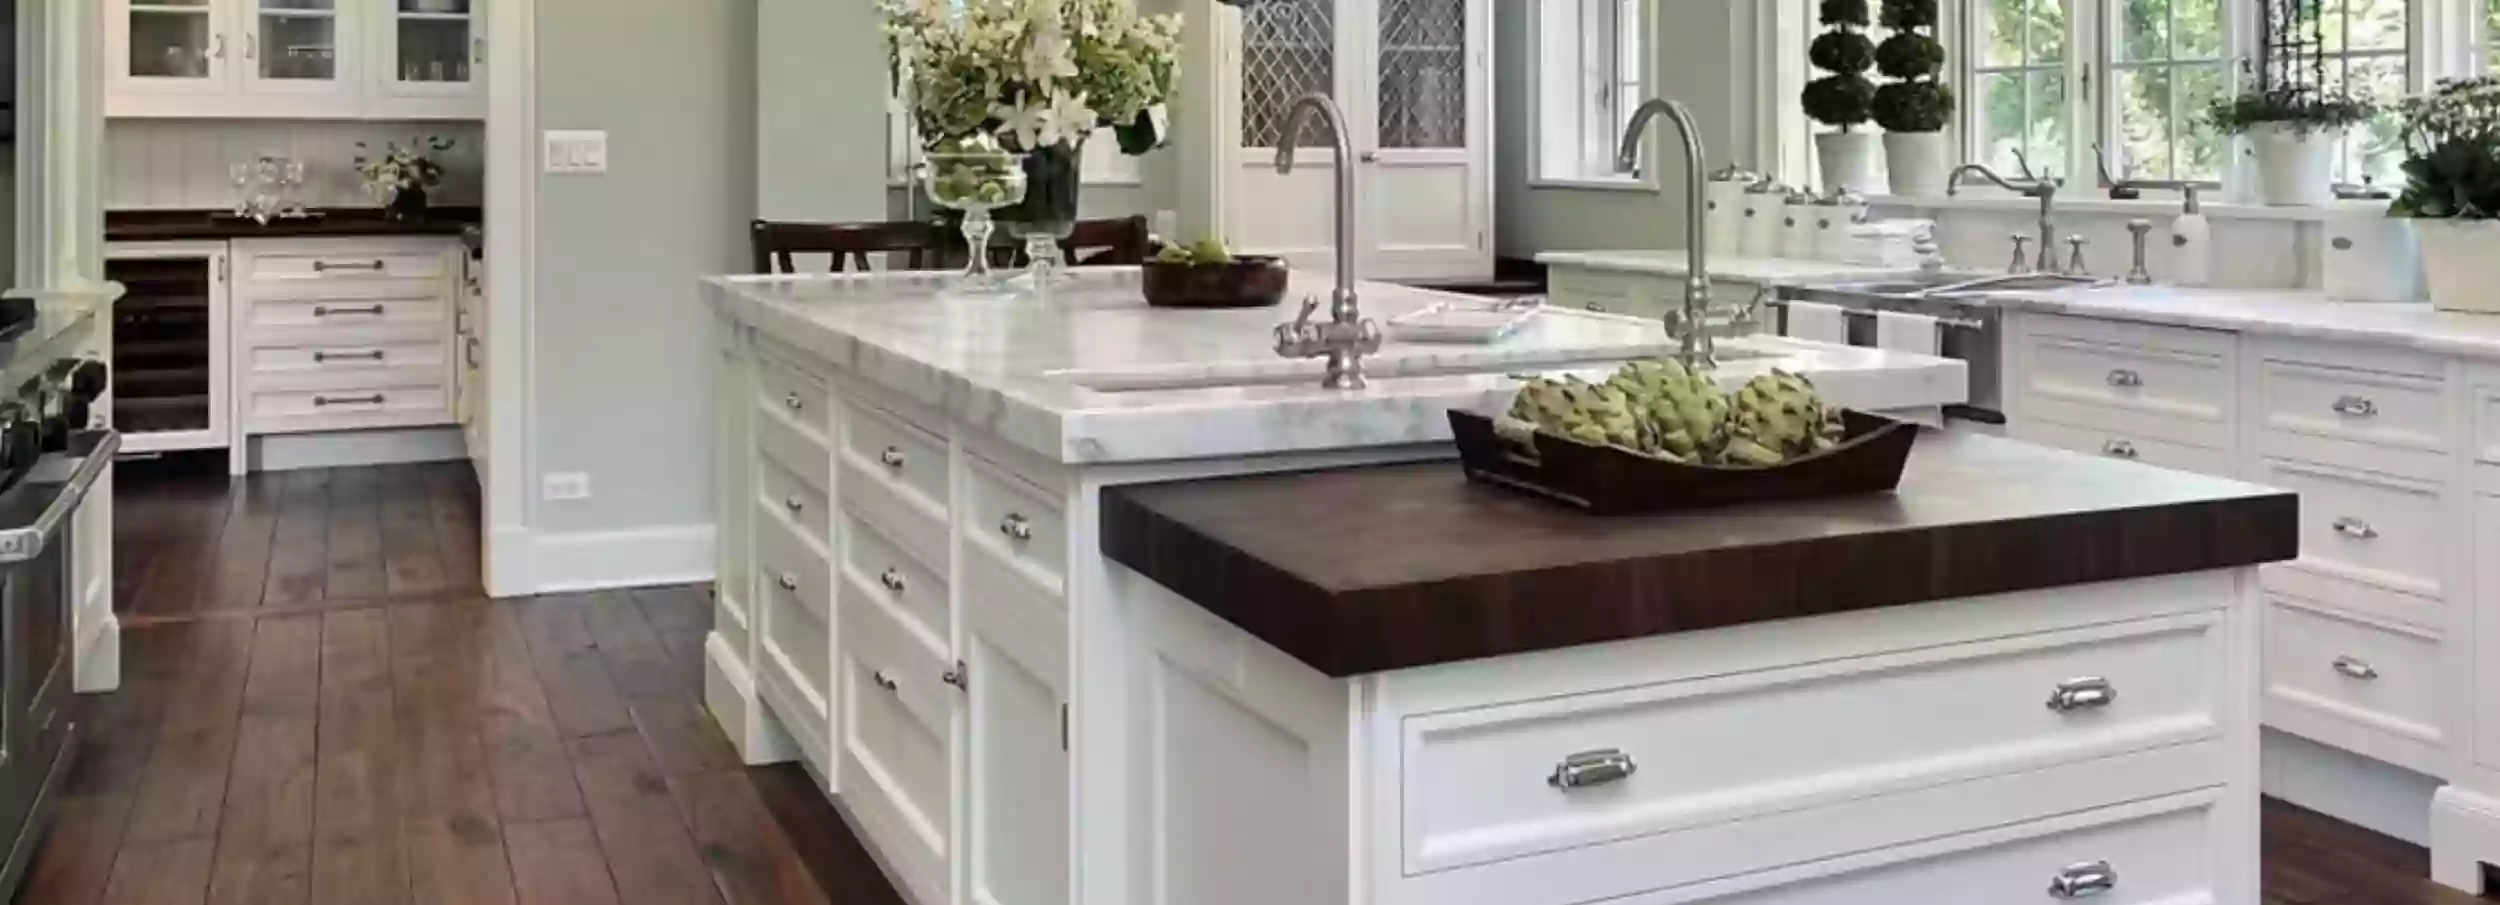 Large residential kitchen with modern, white cabinets.